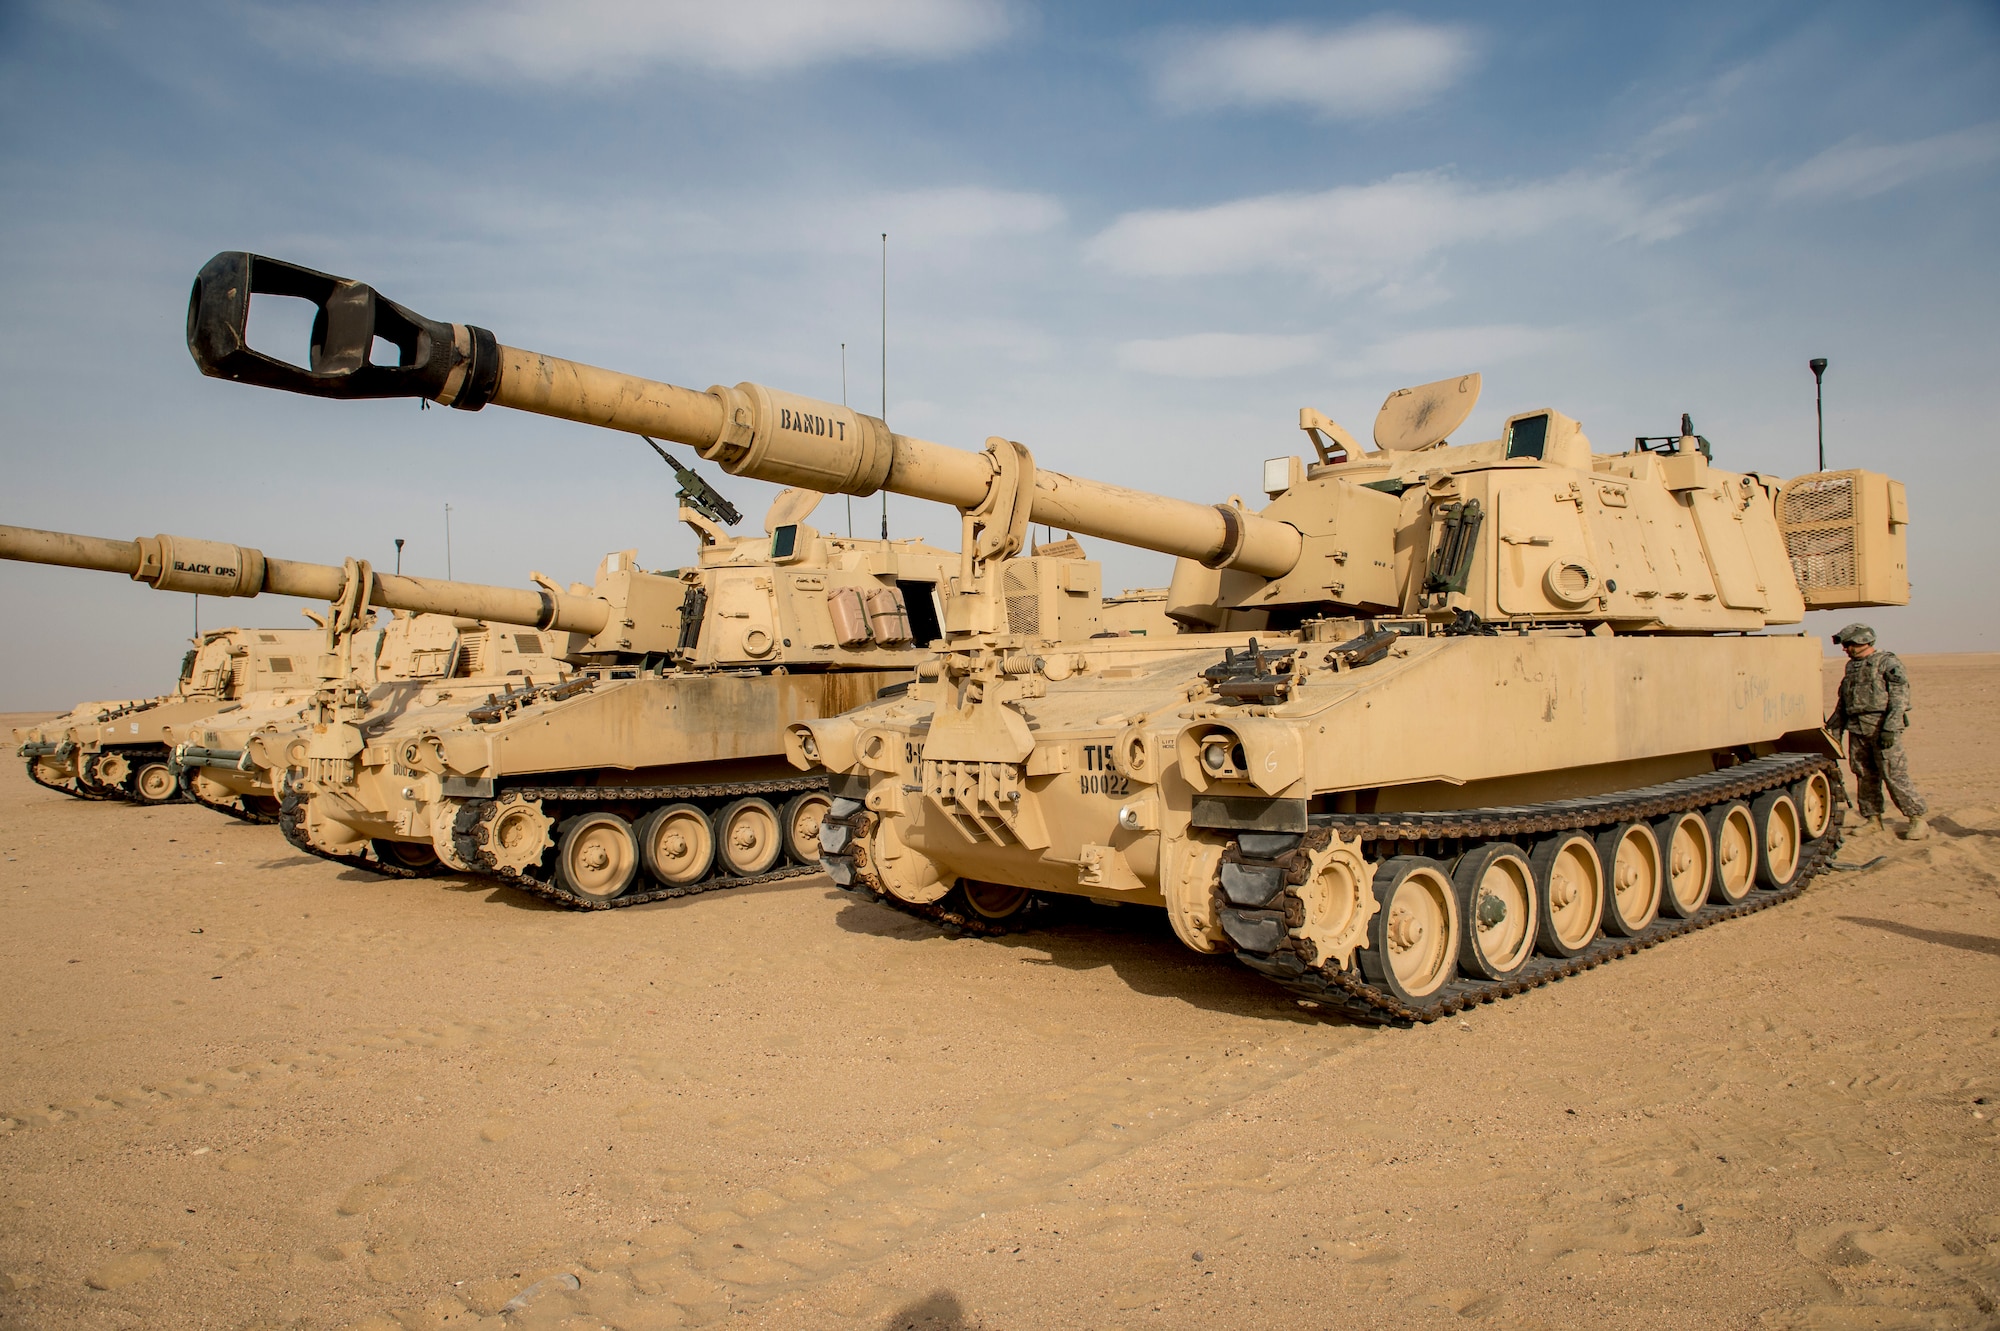 A U.S. Army M109A6 Paladins rests after firing during a Joint Operations live fire exercise on May 7, 2014 at an undisclosed location in Southwest Asia. The operation consisted of Army, Air Force, and Navy personnel working together to conduct a coordinated strike against a single target. (U.S. Air Force photo by Staff Sgt. Jeremy Bowcock)